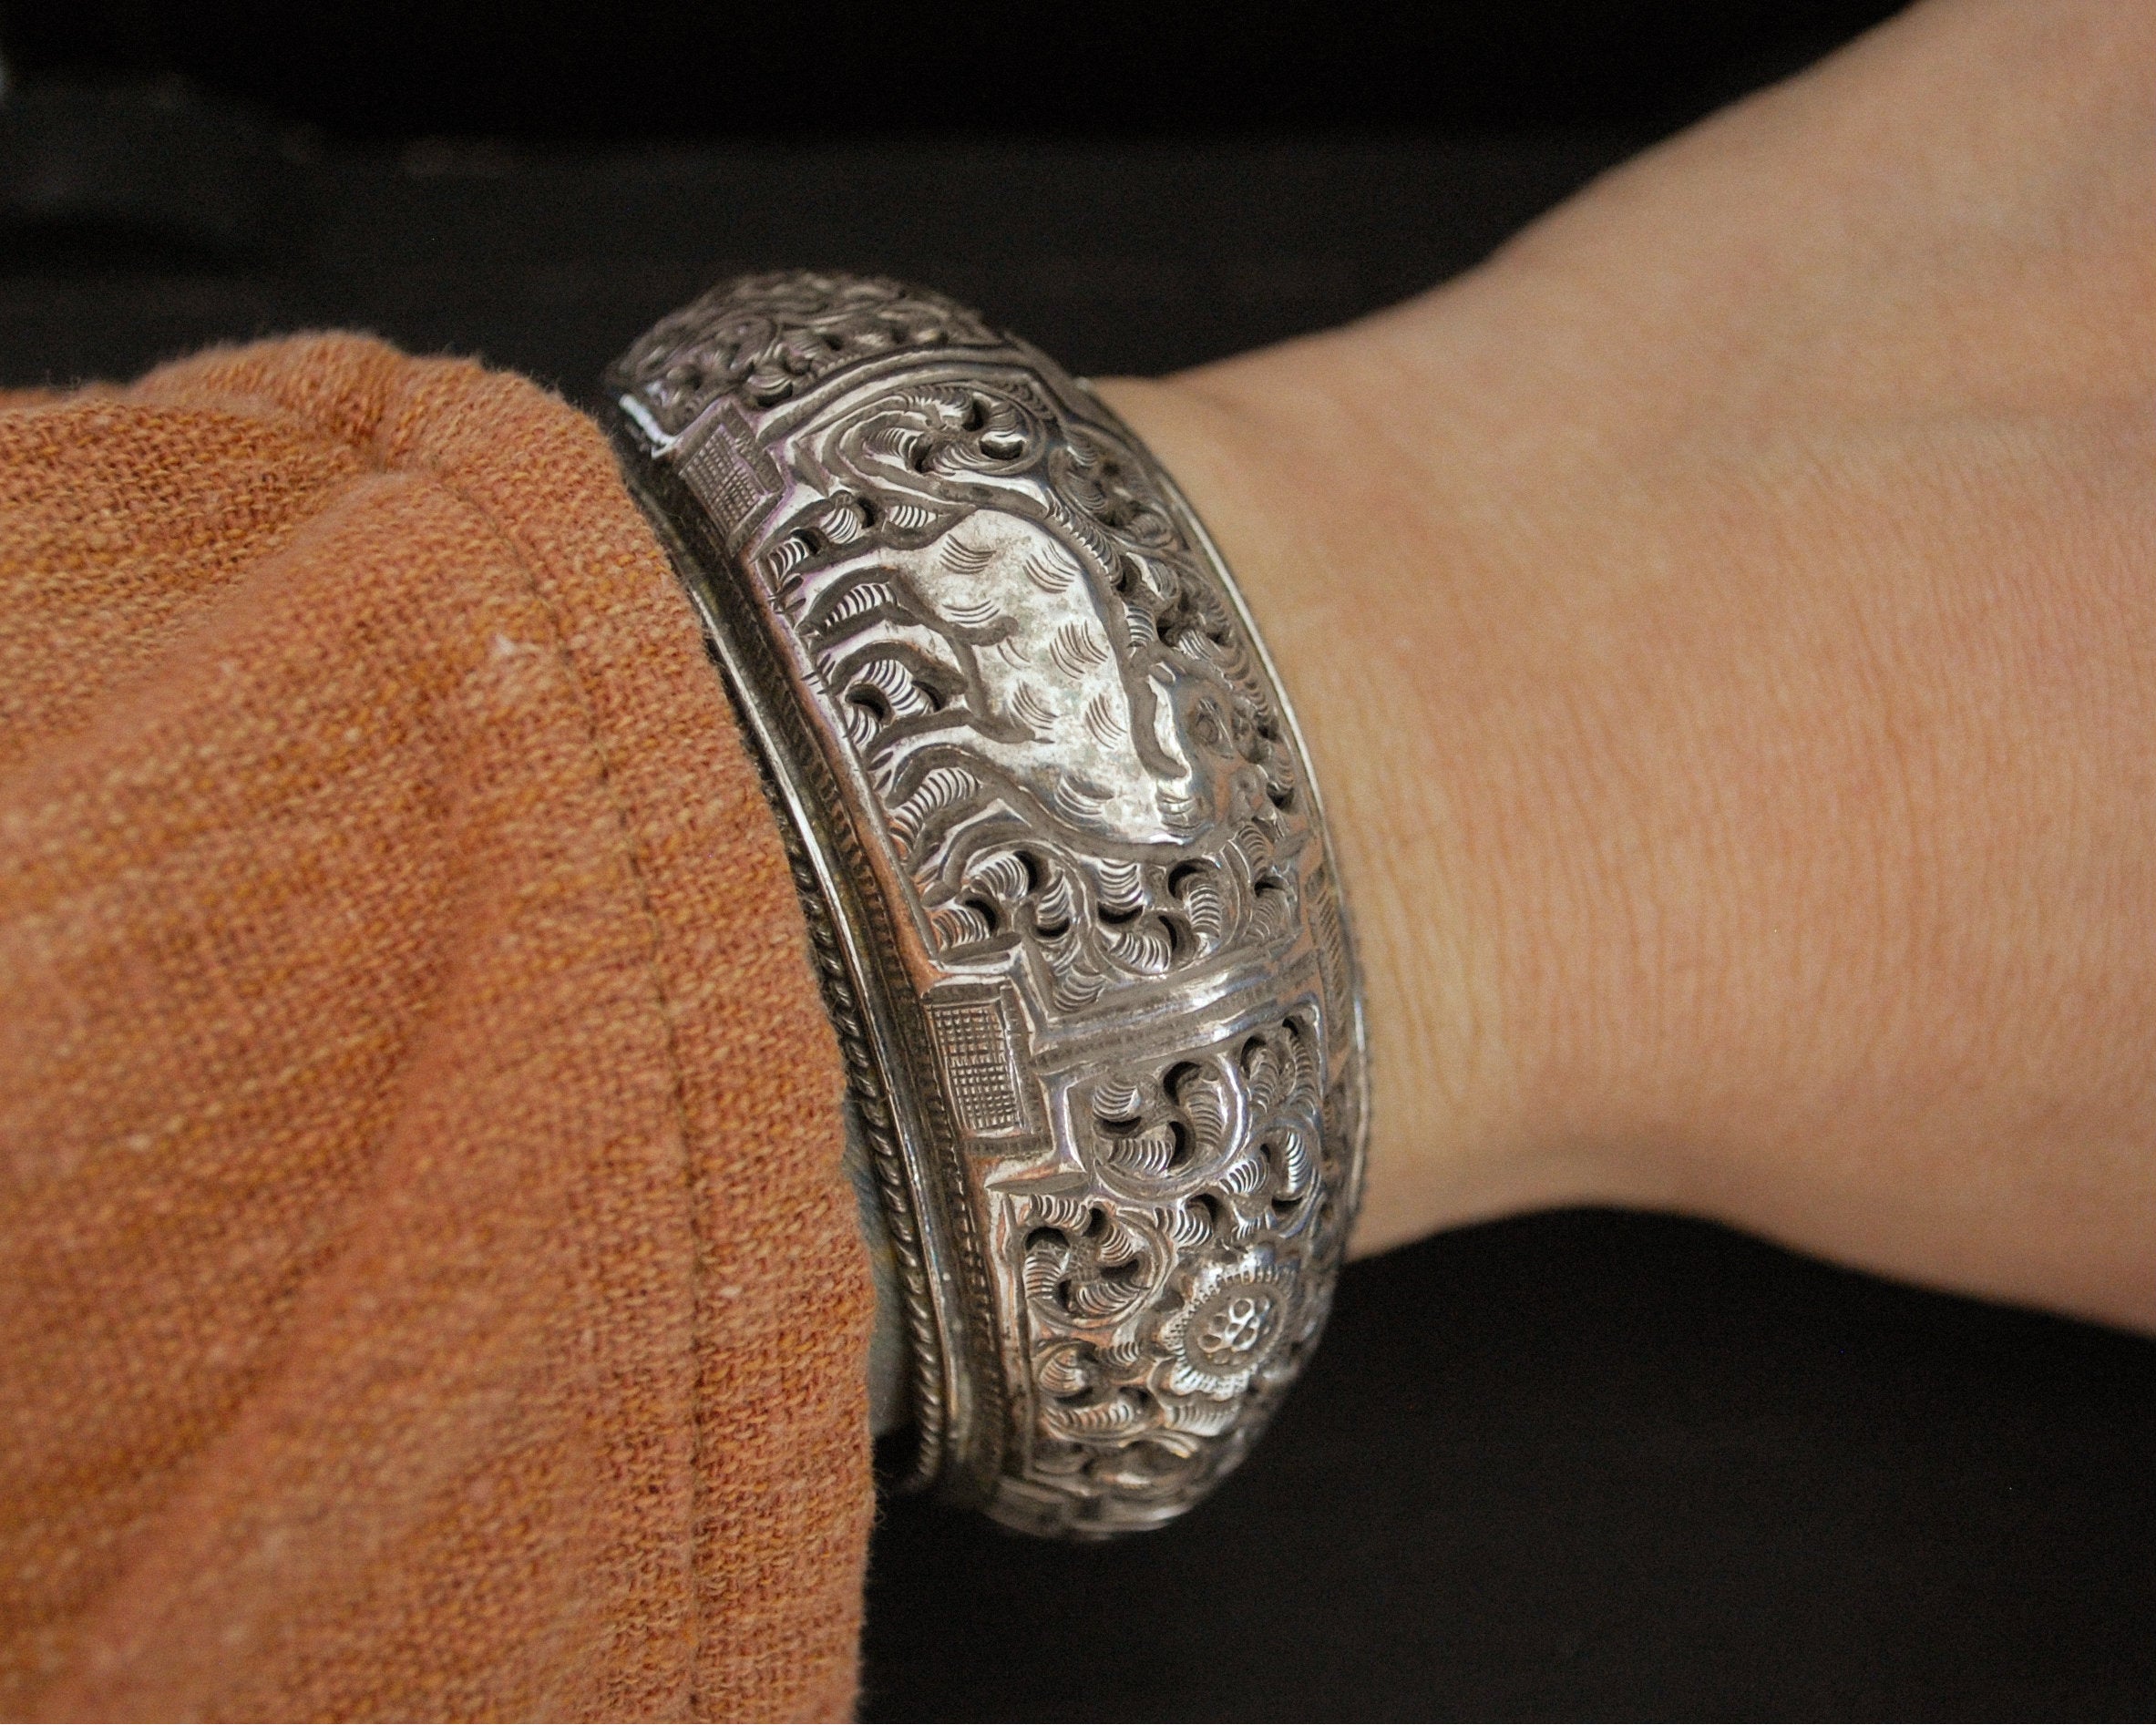 Nepali Repoussee Bracelet with Deer